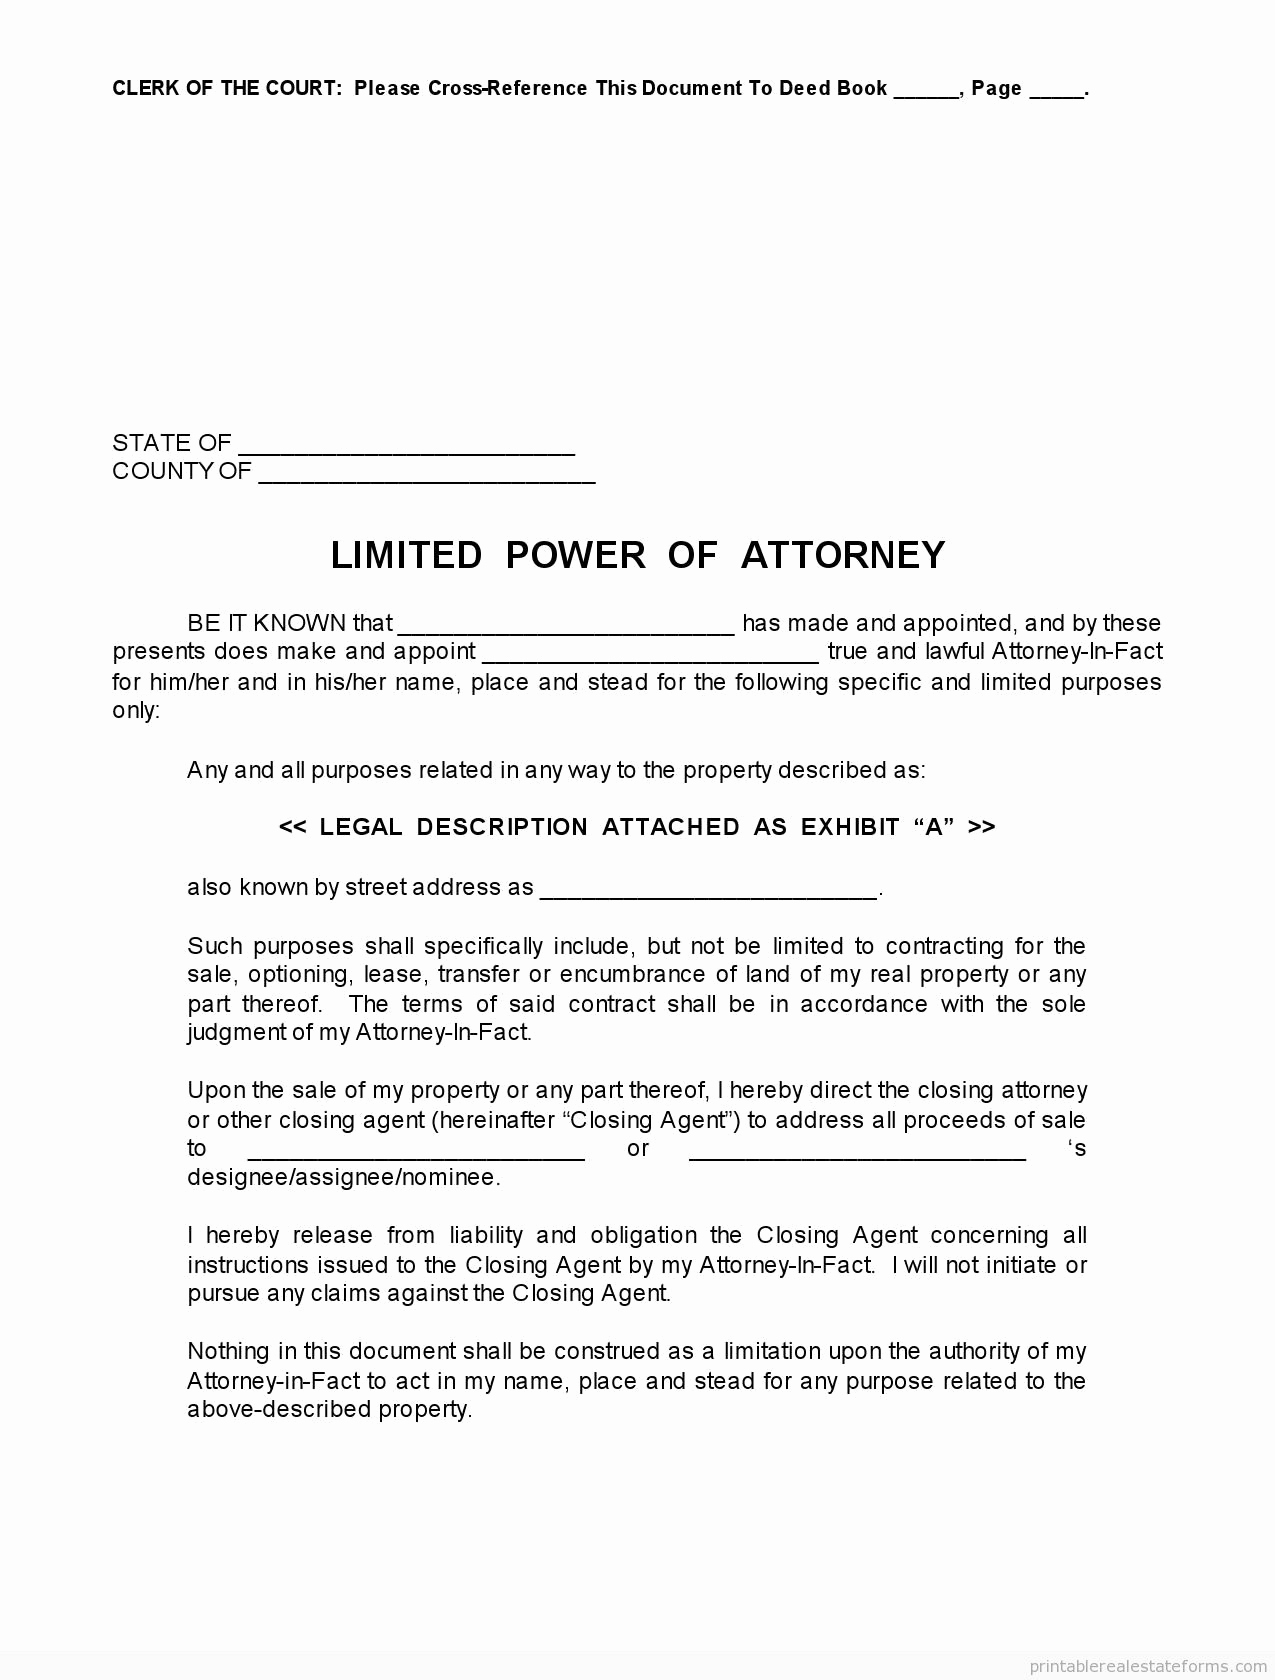 Special Power Of attorney form New Free Printable Limited Power Of attorney forms [sample]